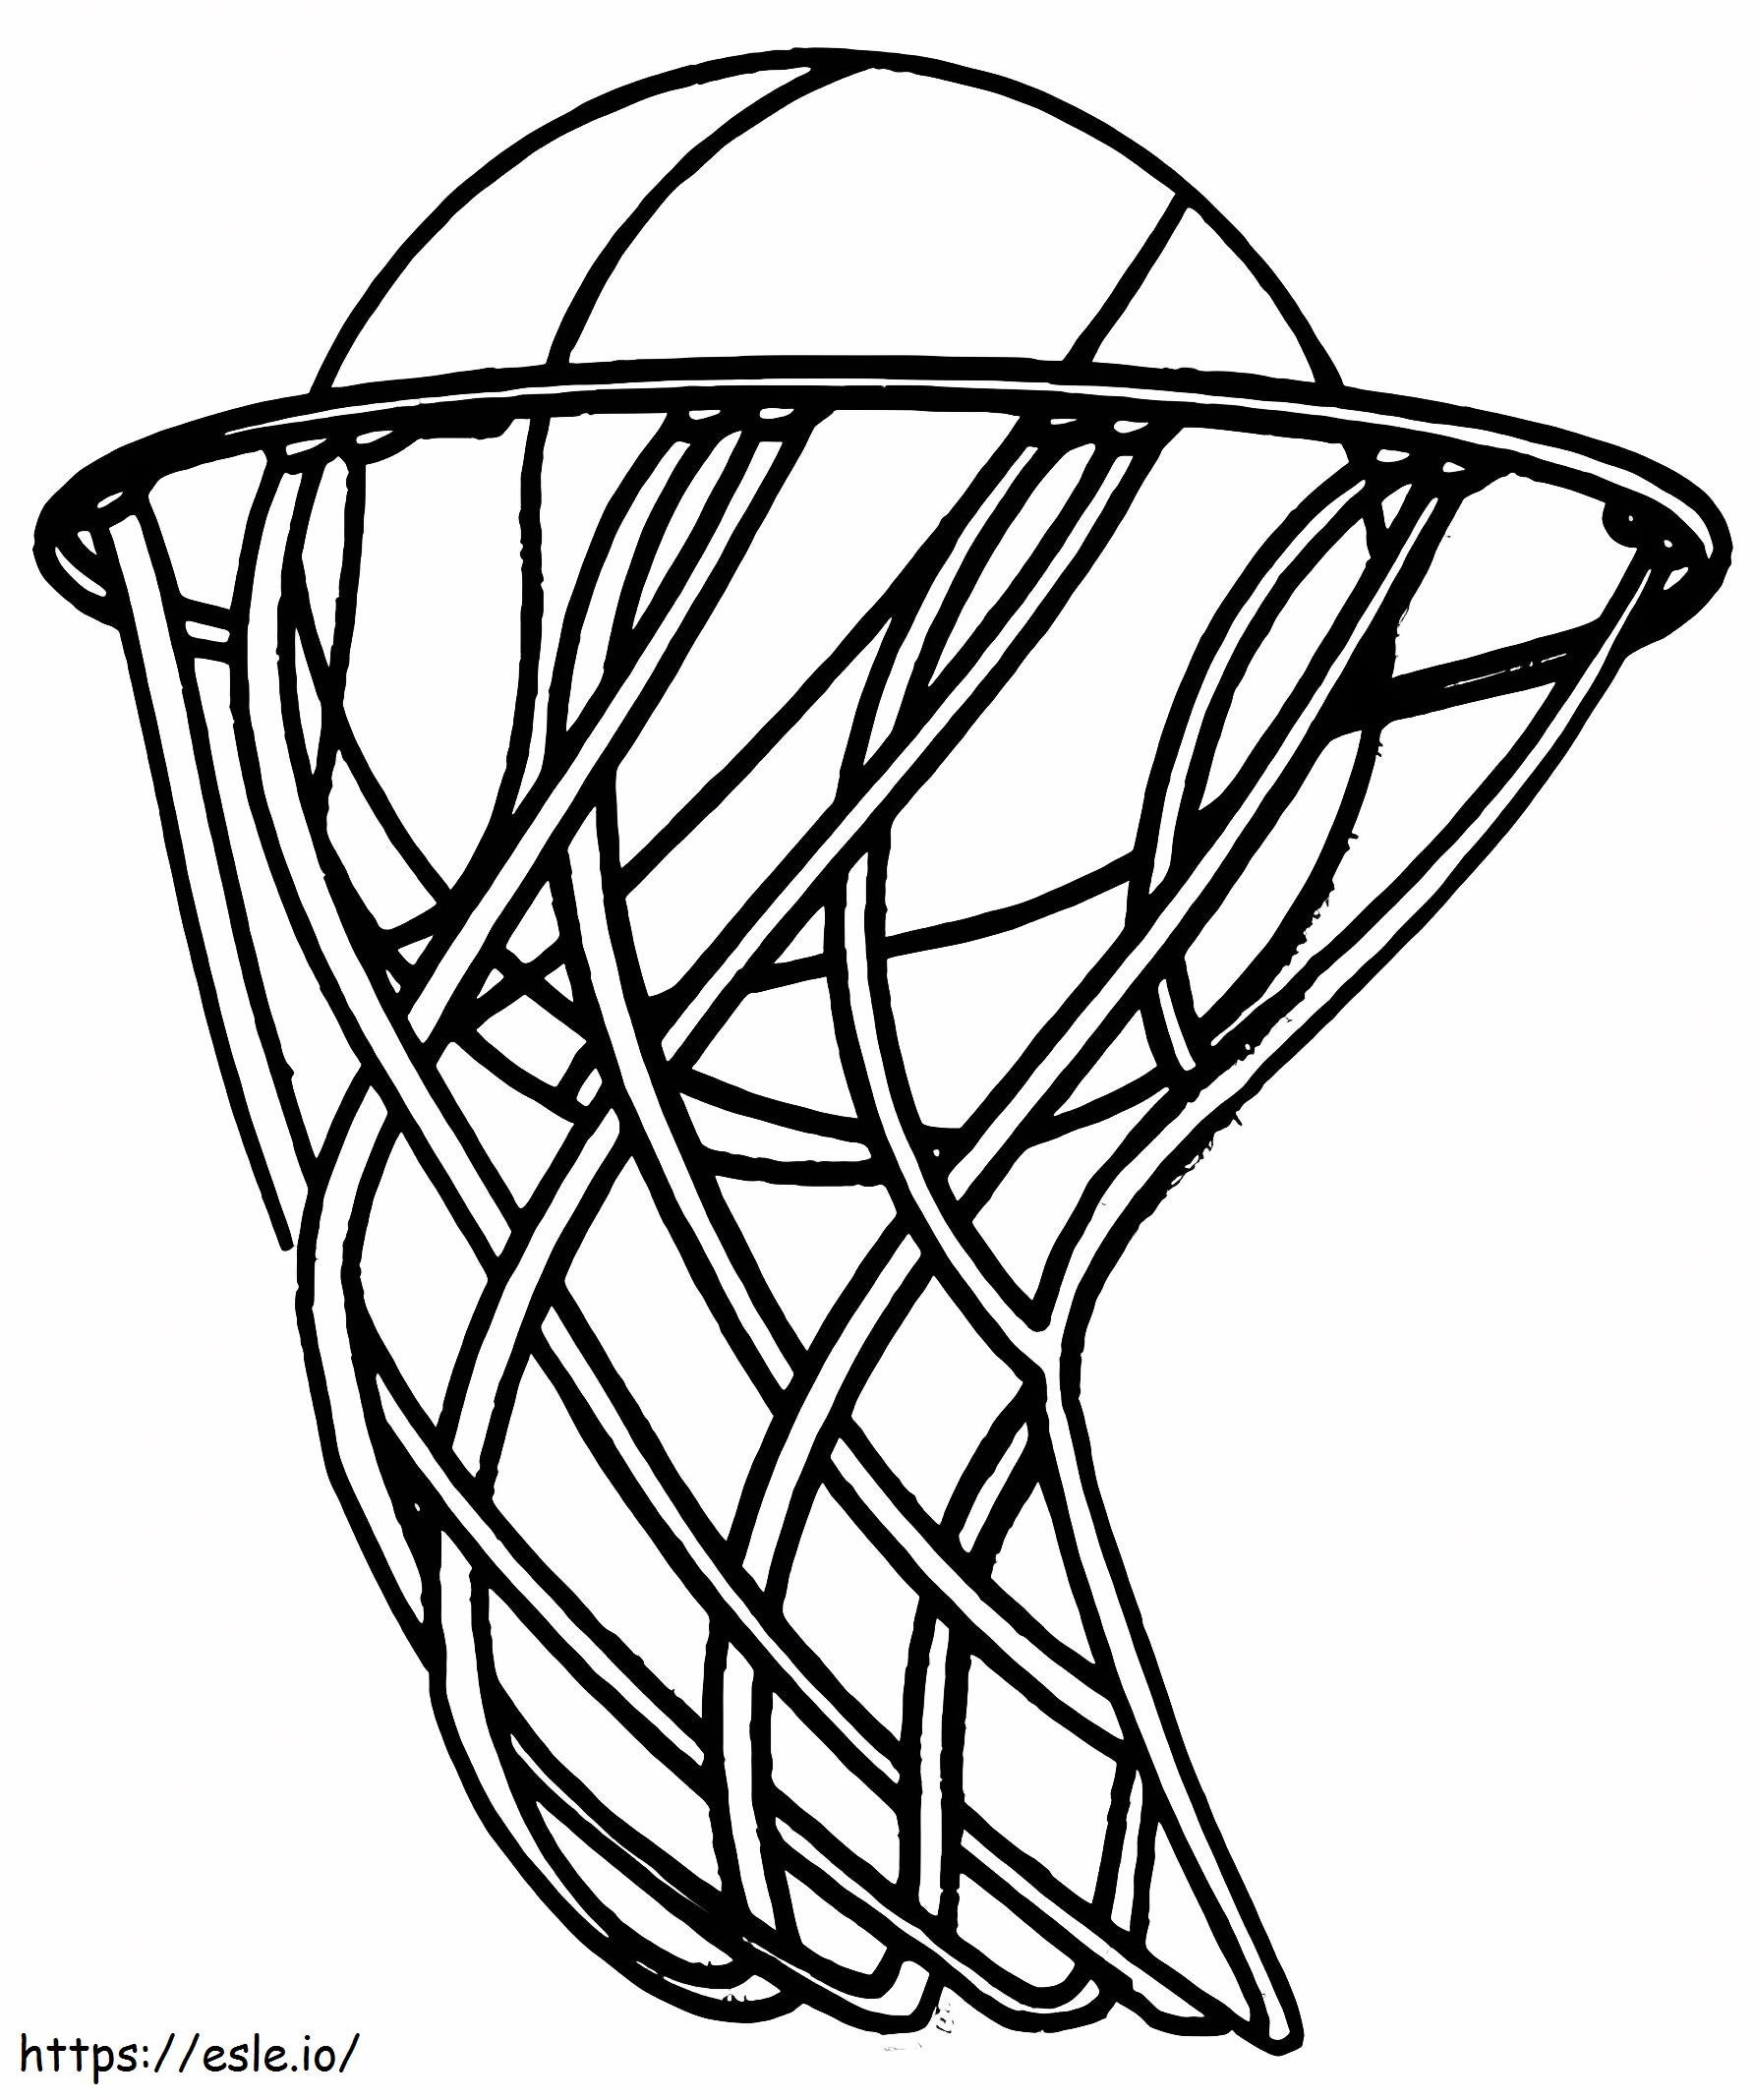 1559609809 Basket Ball A4 coloring page